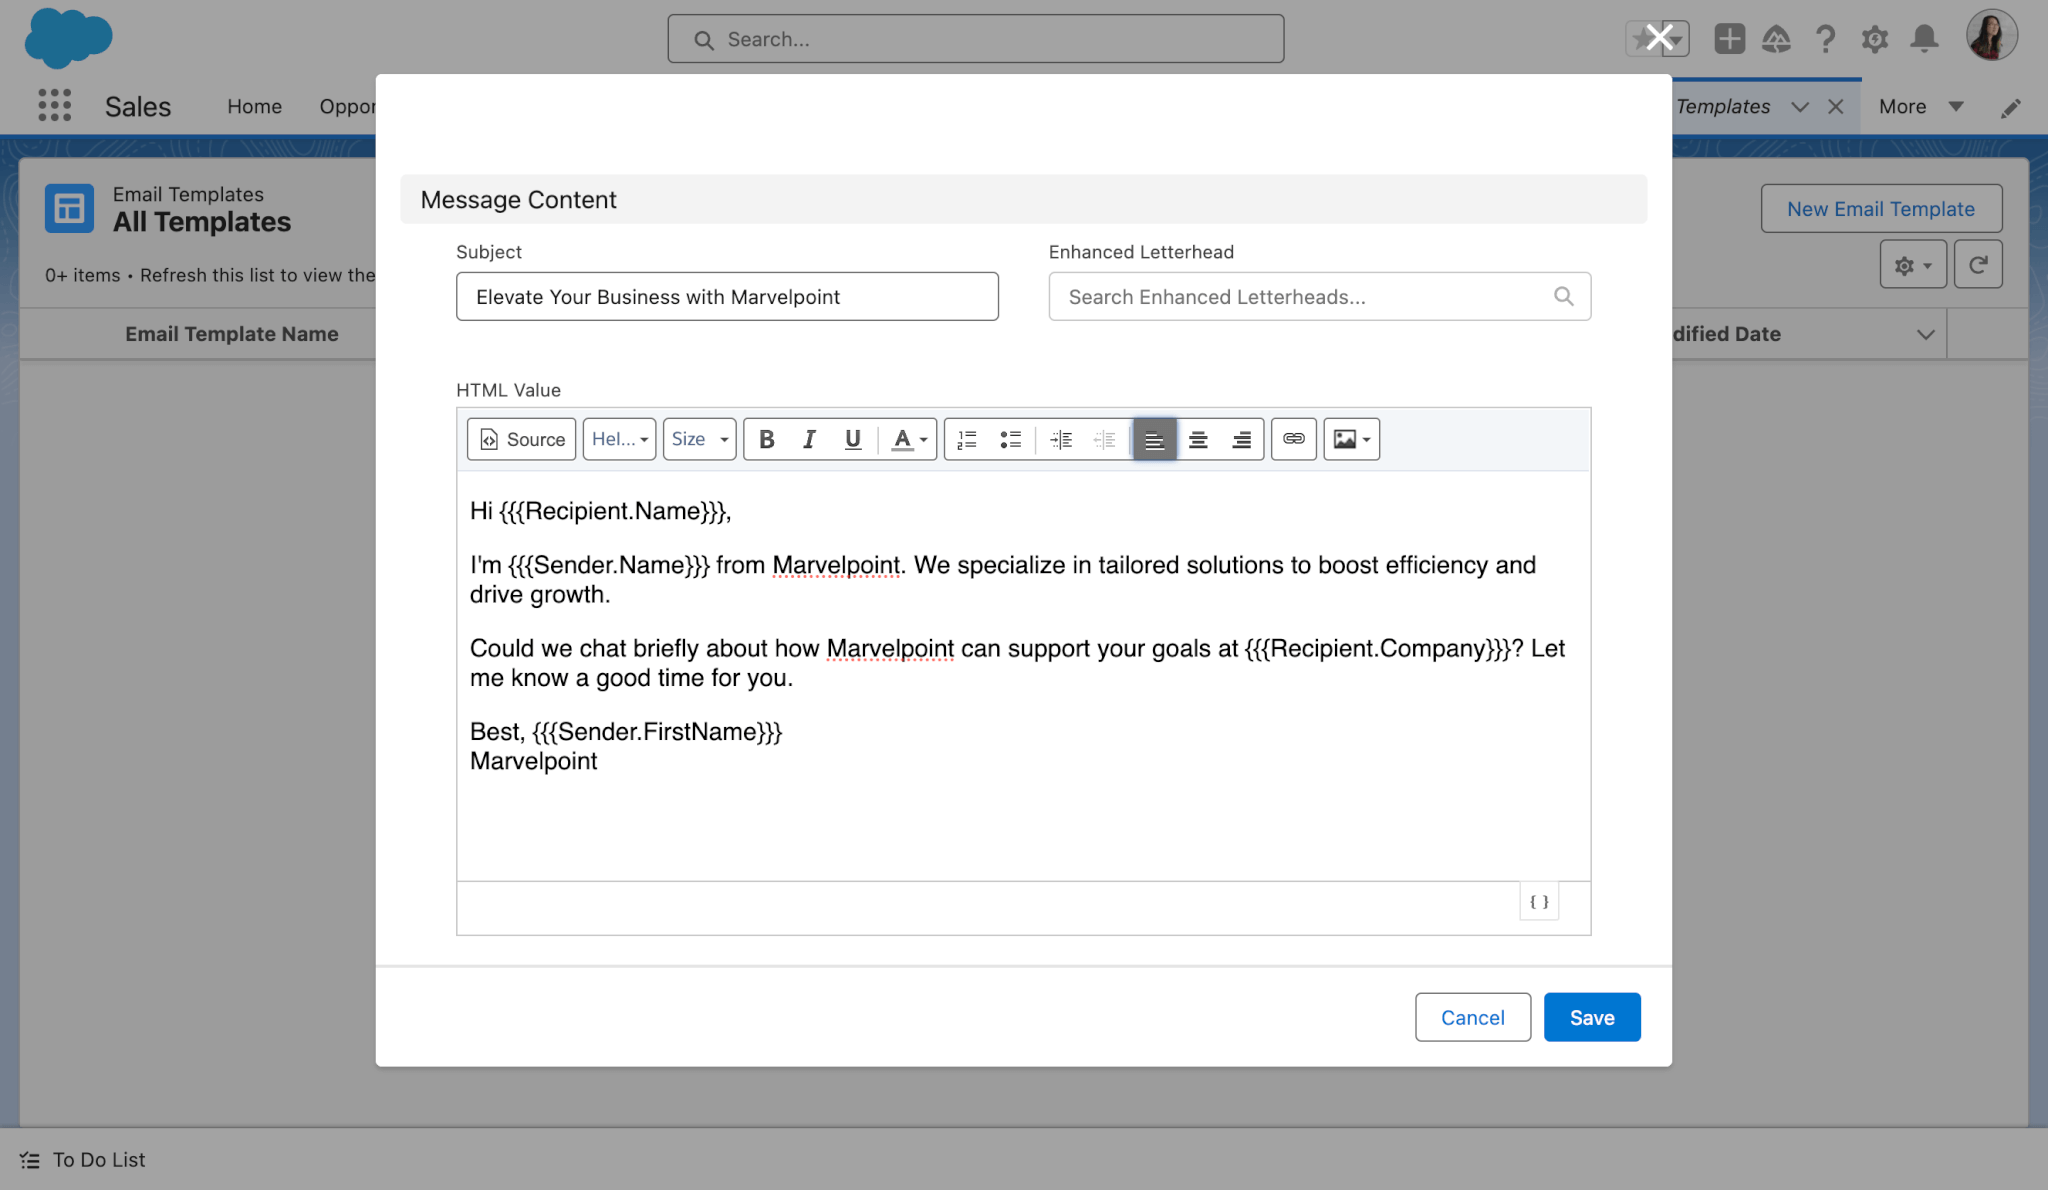 Body text input in the New Email Template modal